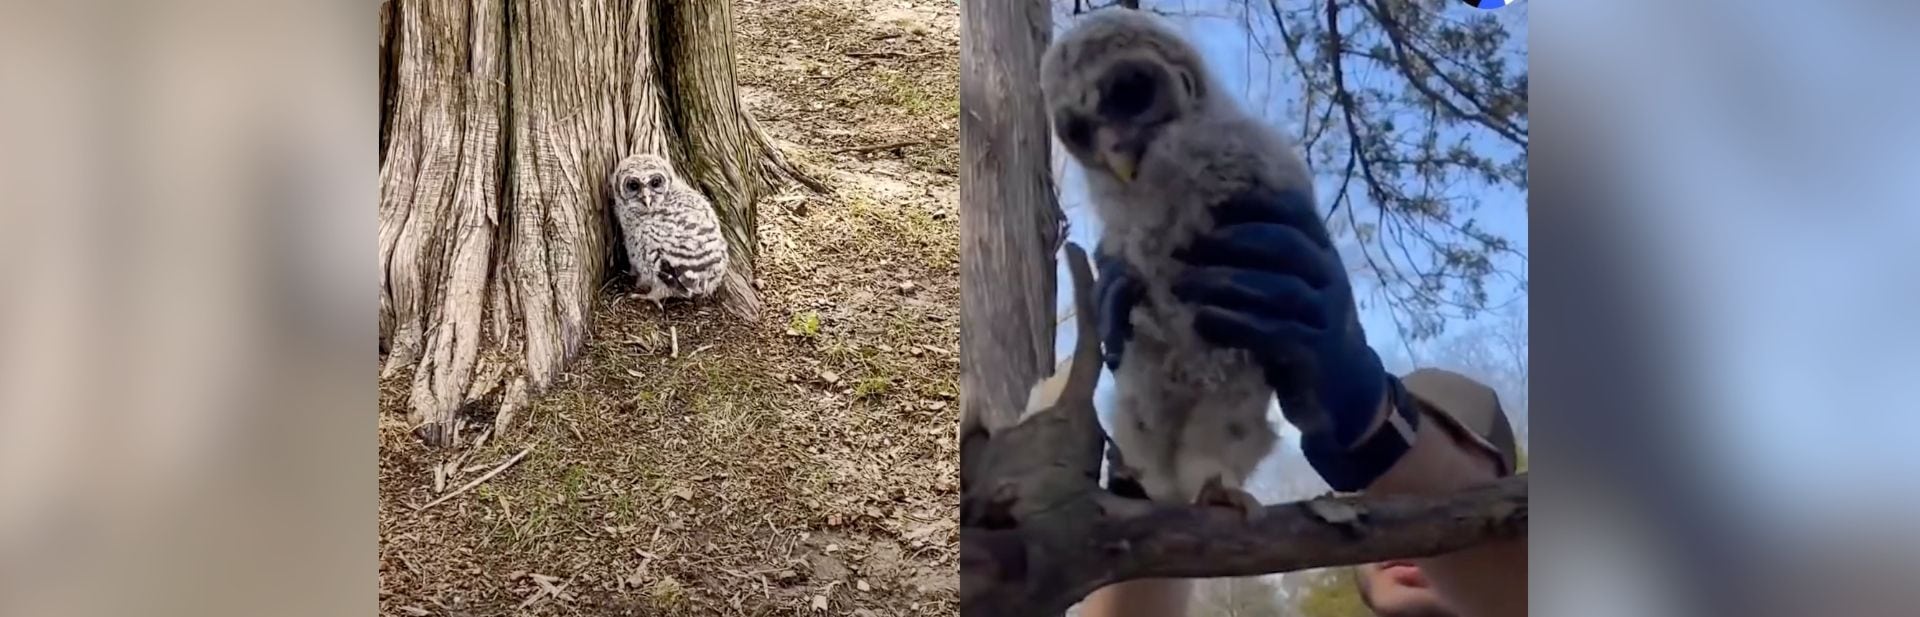 Couple’s Quick Thinking Leads to Heartwarming Owl Rescue